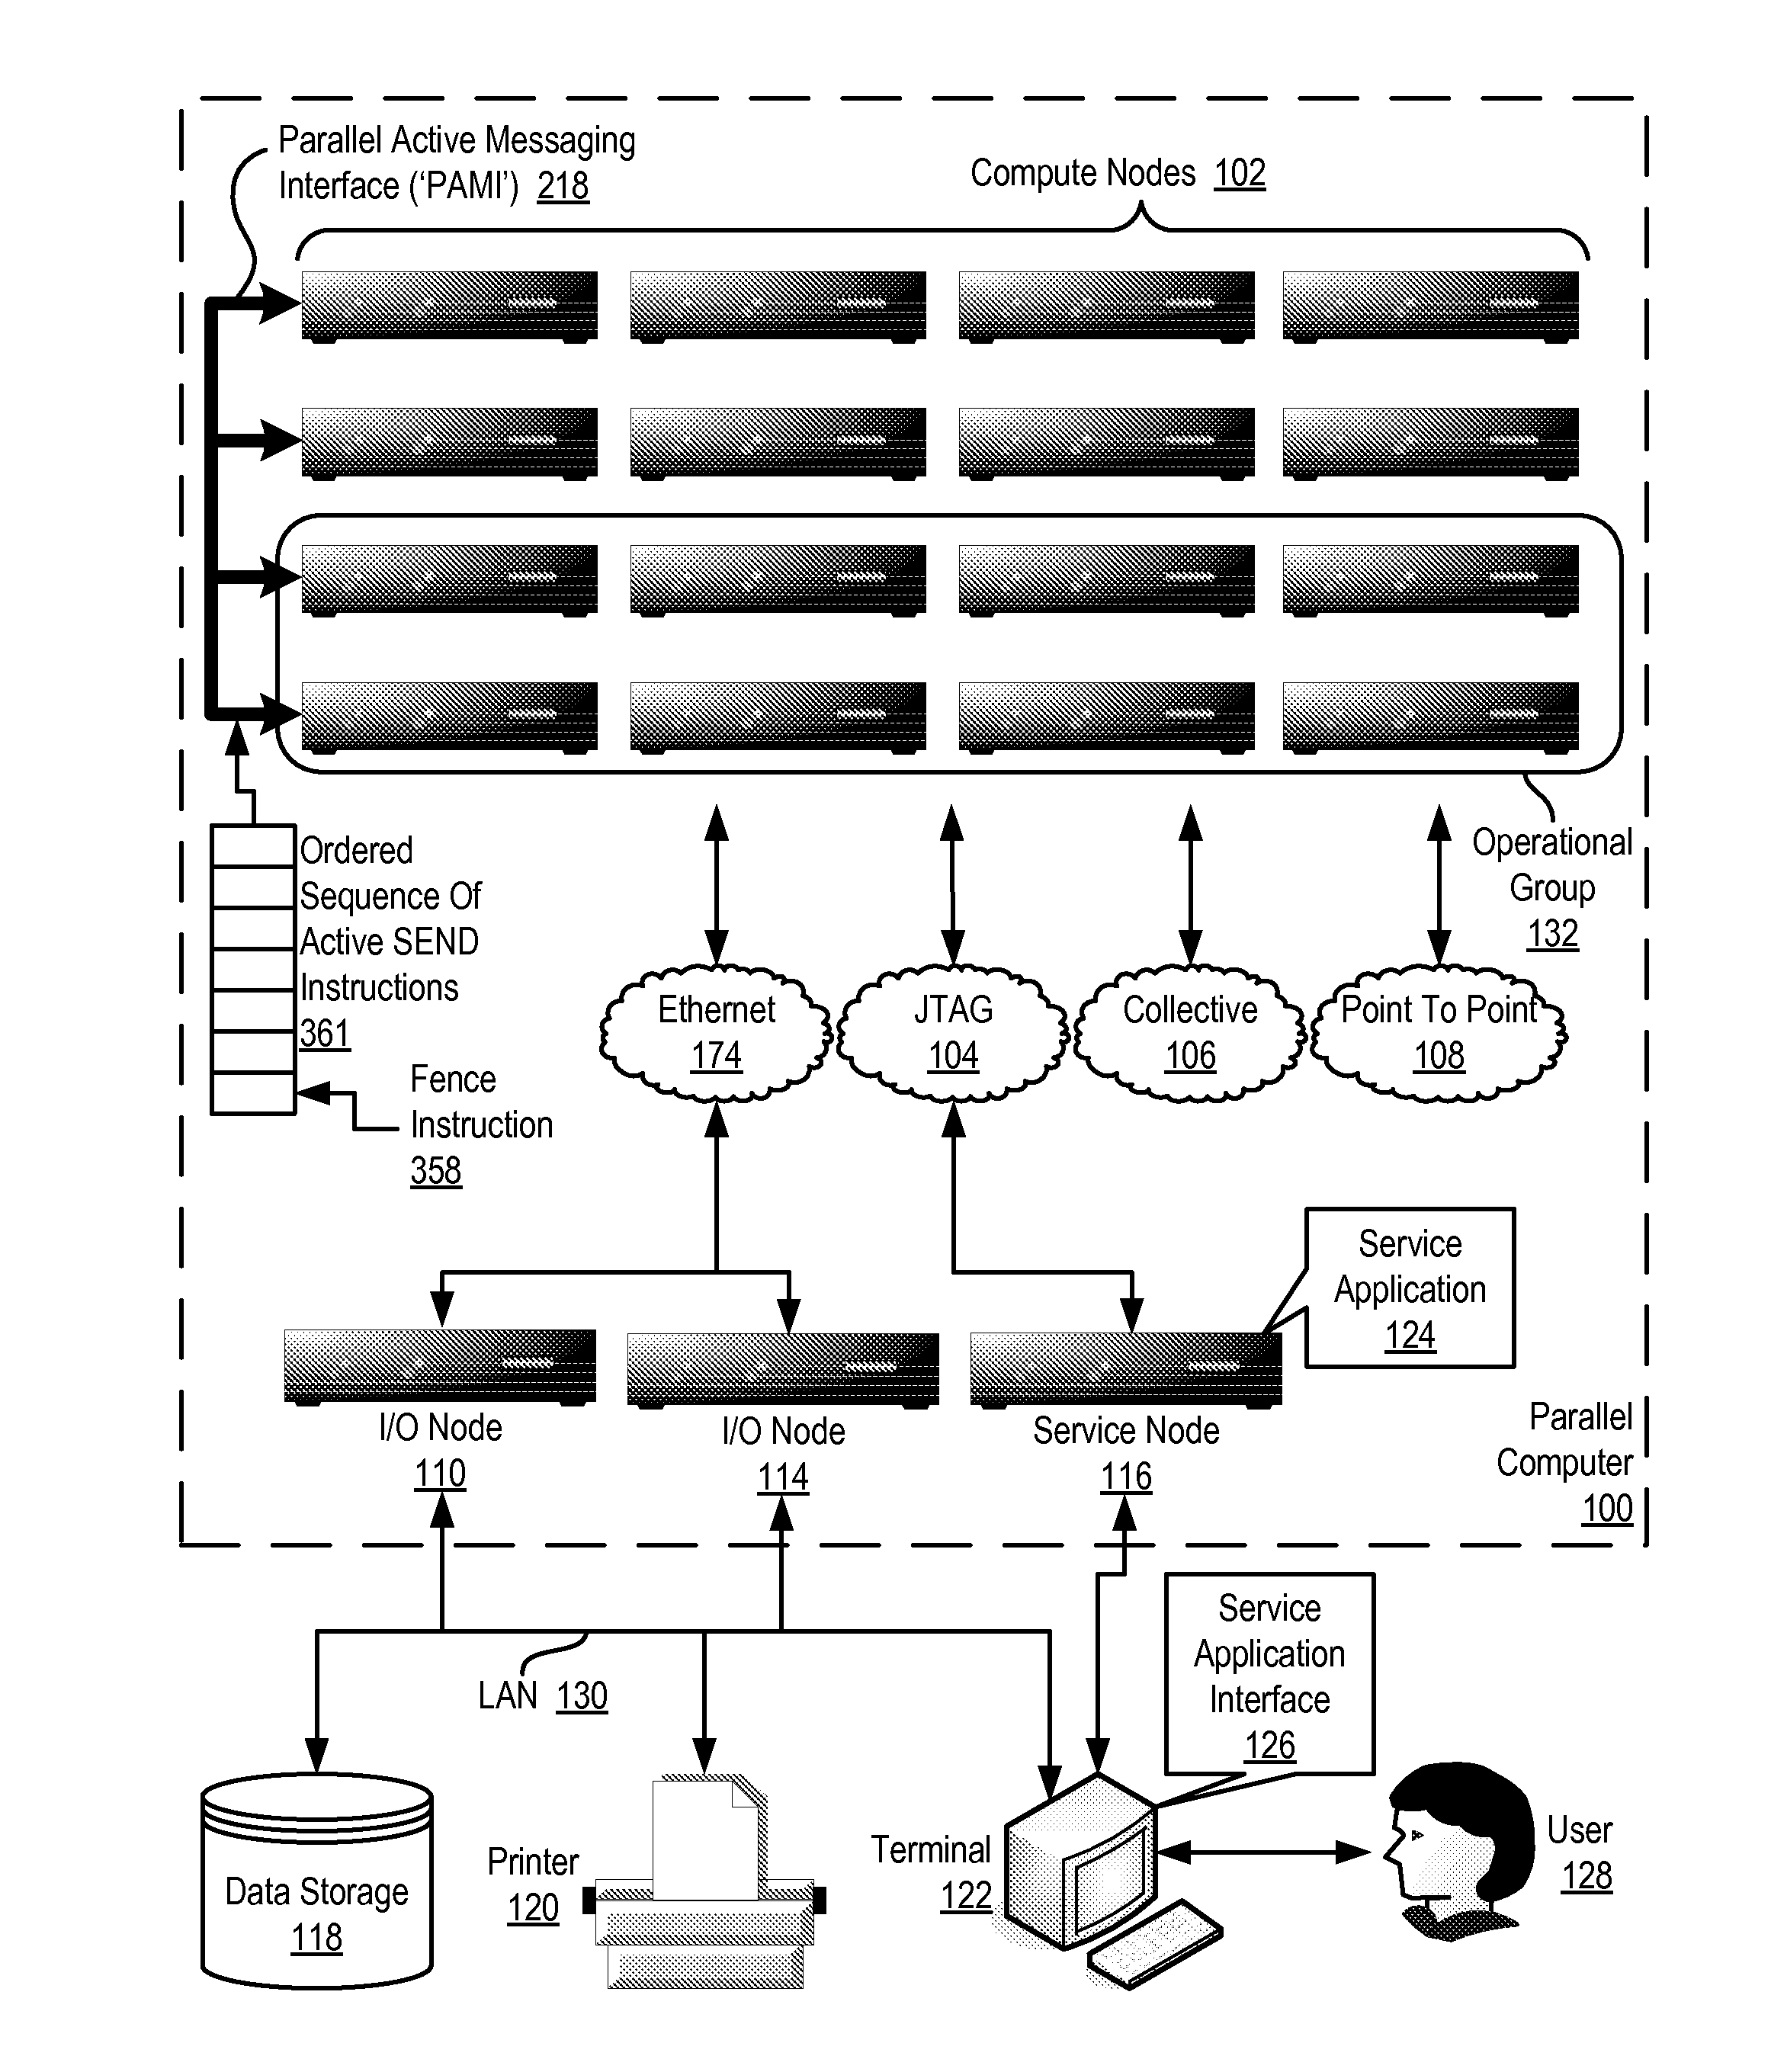 Fencing Data Transfers In A Parallel Active Messaging Interface Of A Parallel Computer